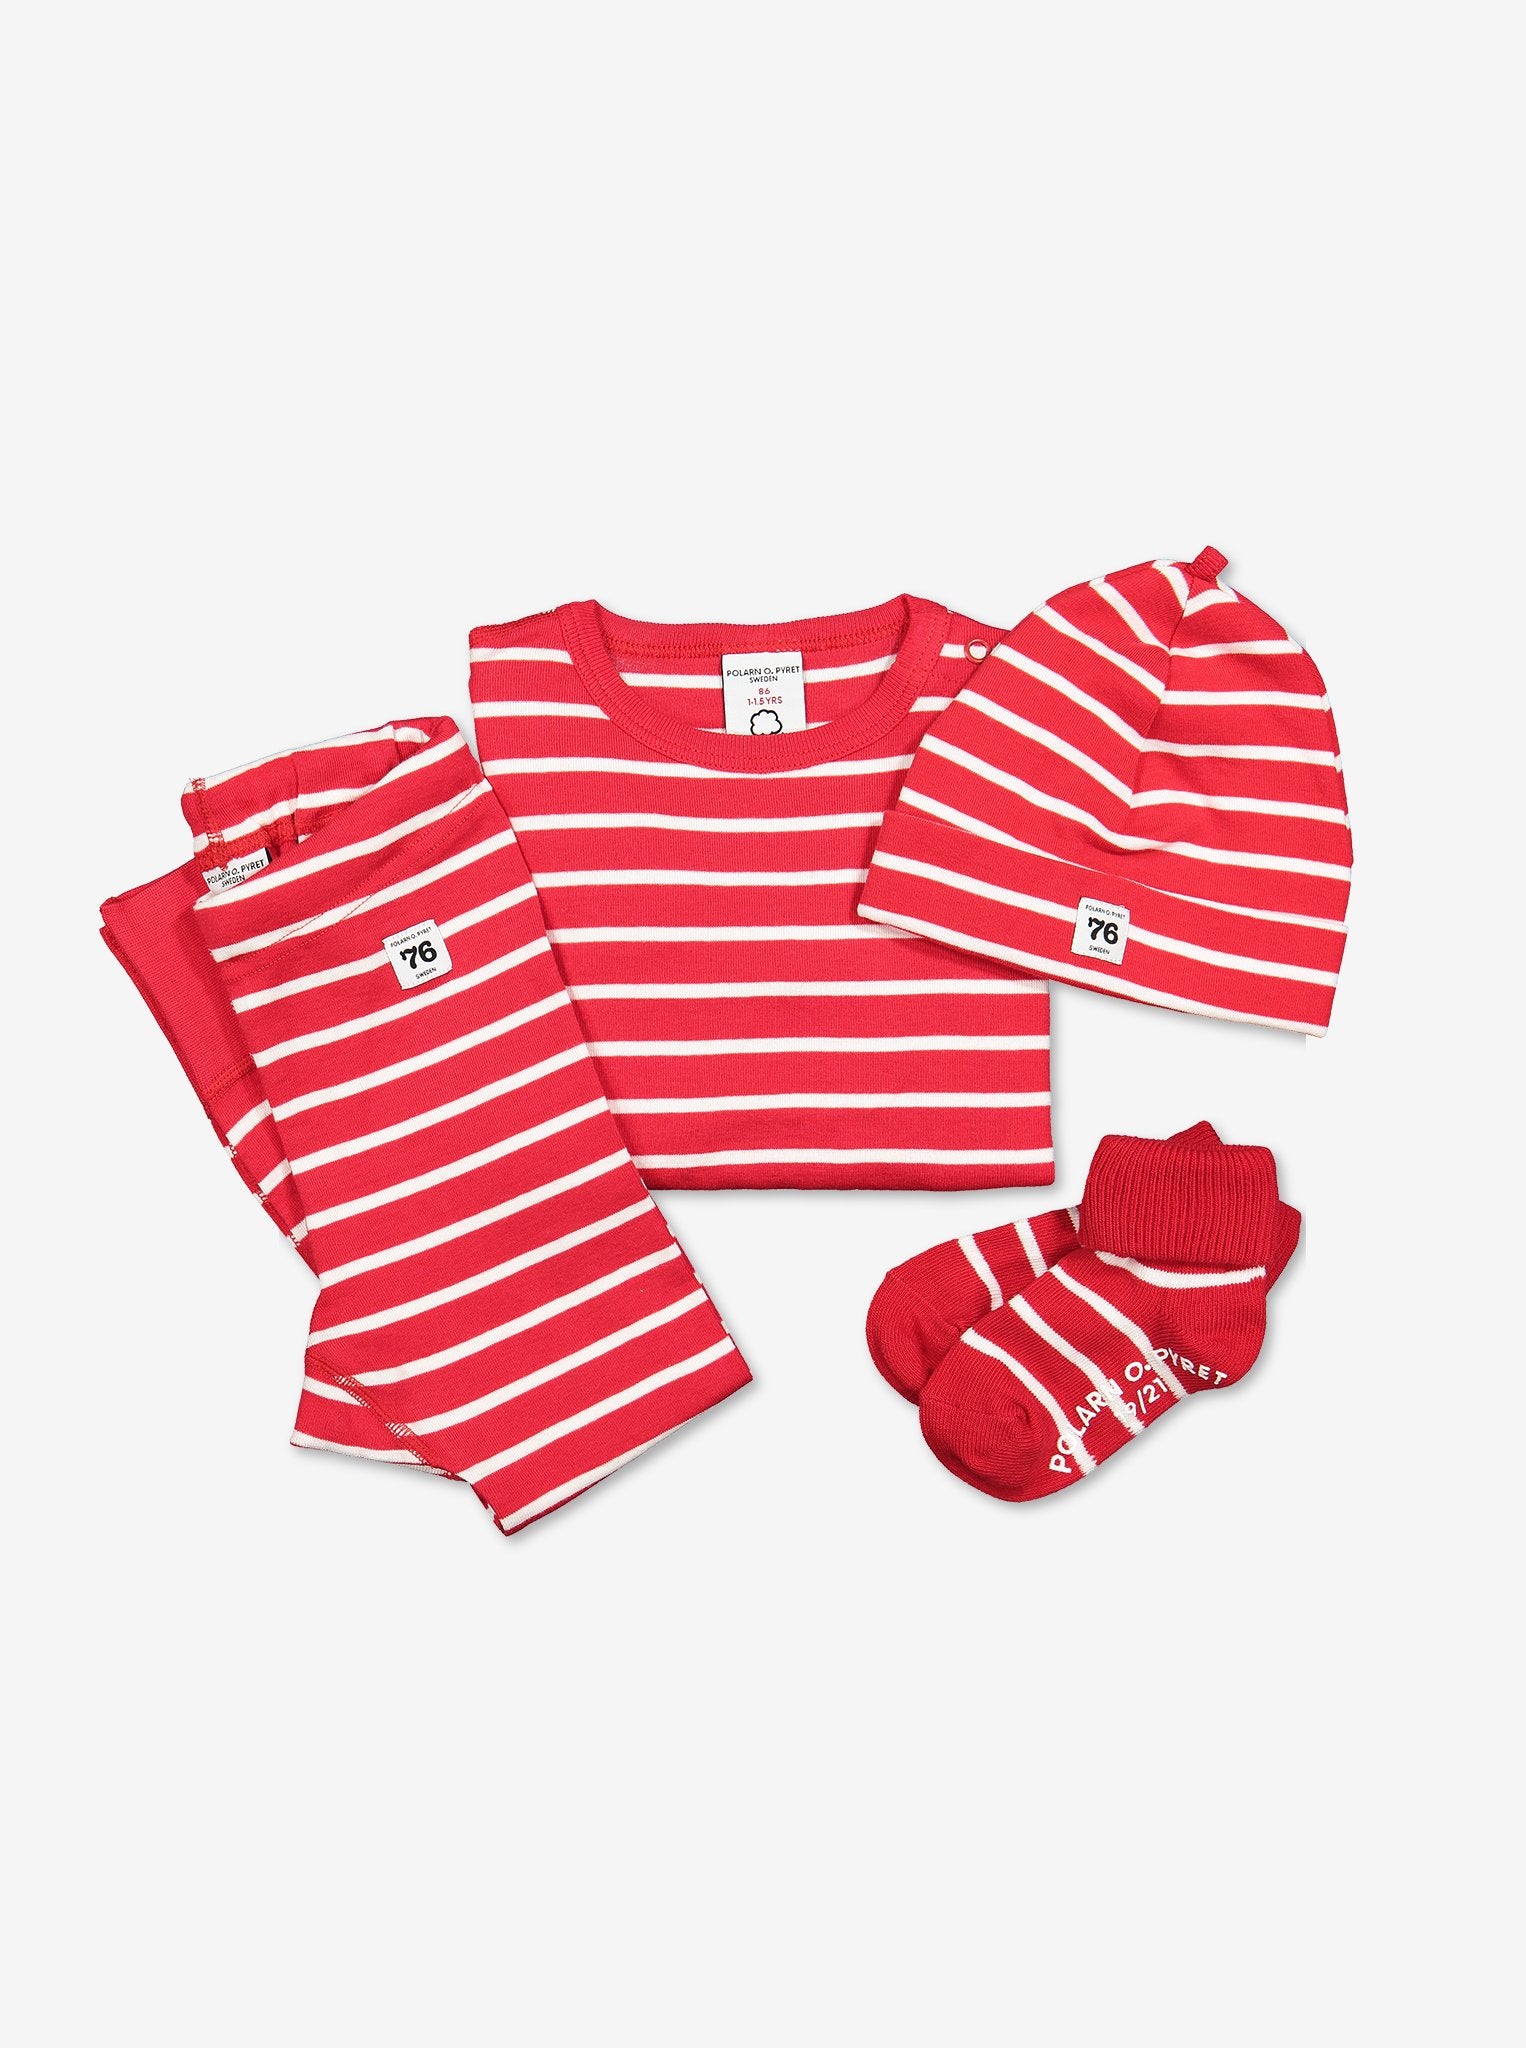 baby top, hat, socks, bottoms in red and white stripes, ethical quality organic cotton polarn o. pyret p